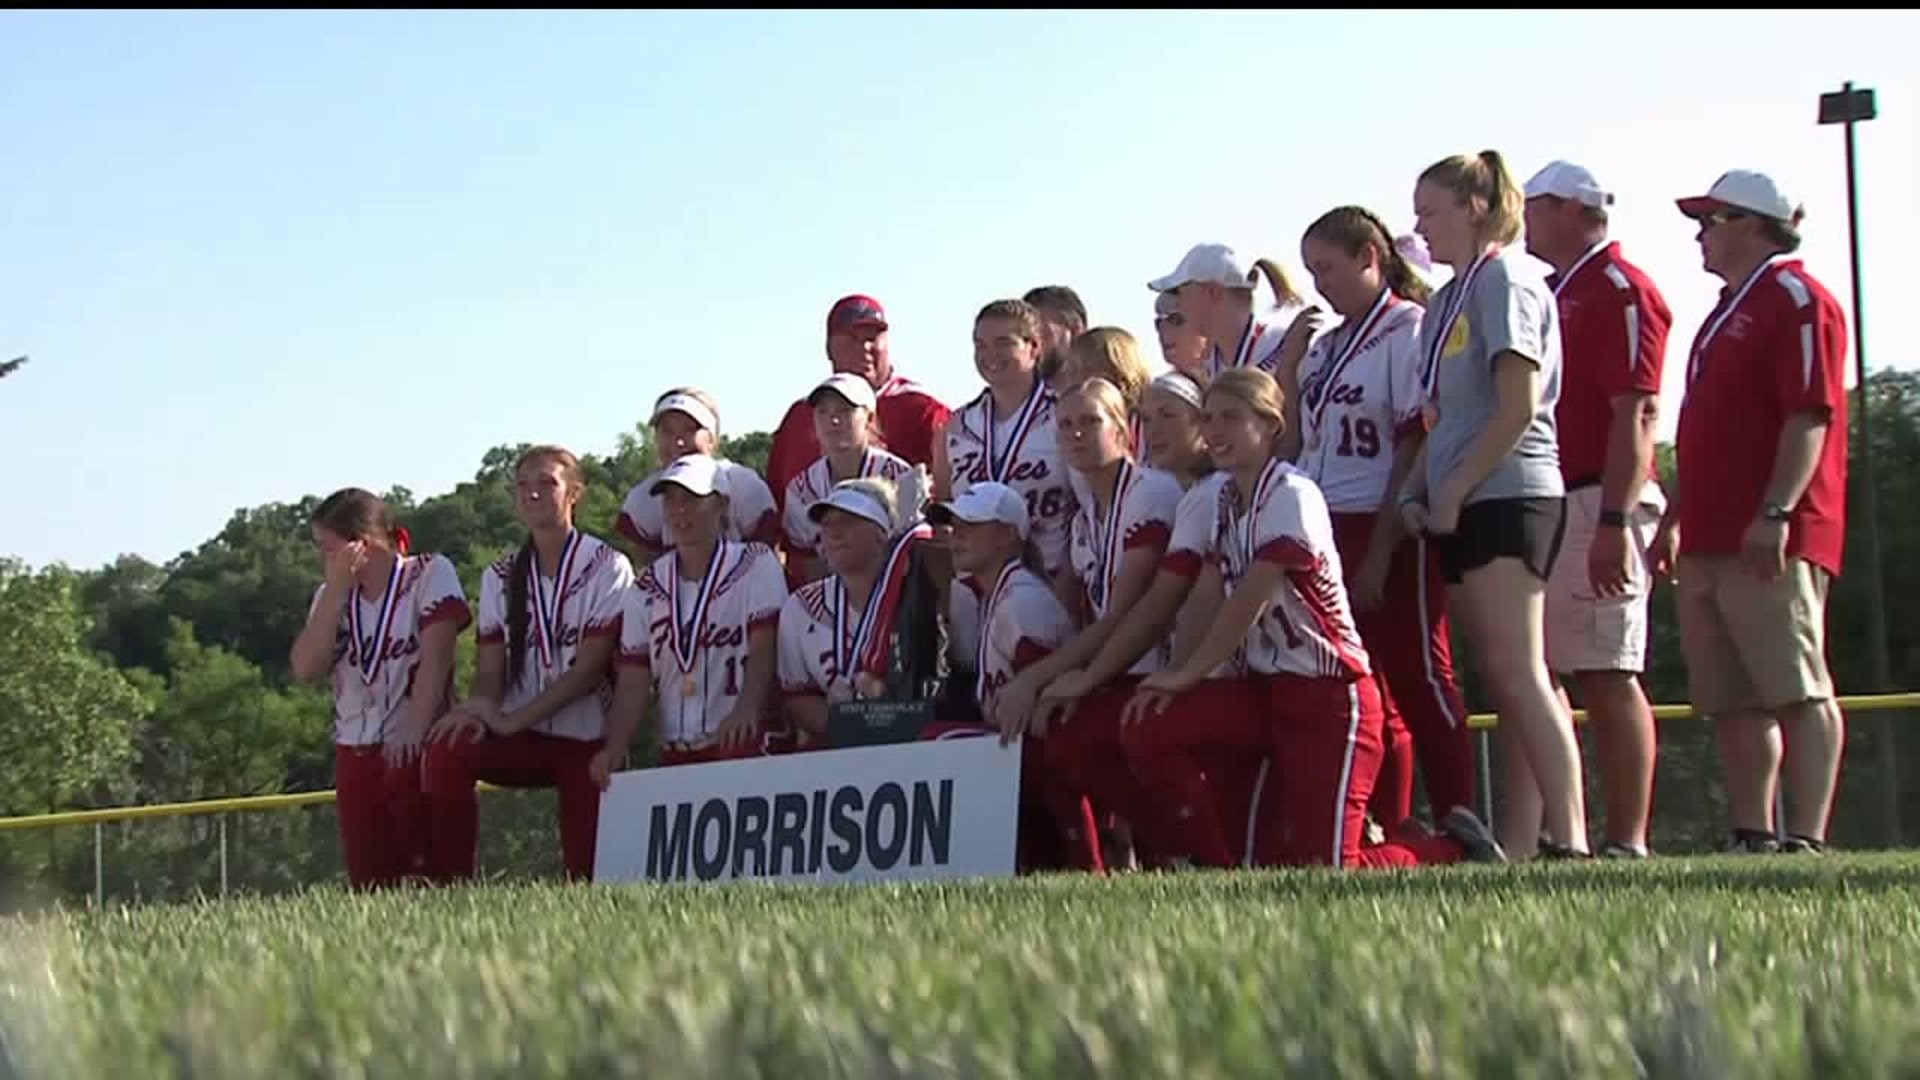 Morrison Softball Takes 3rd at State